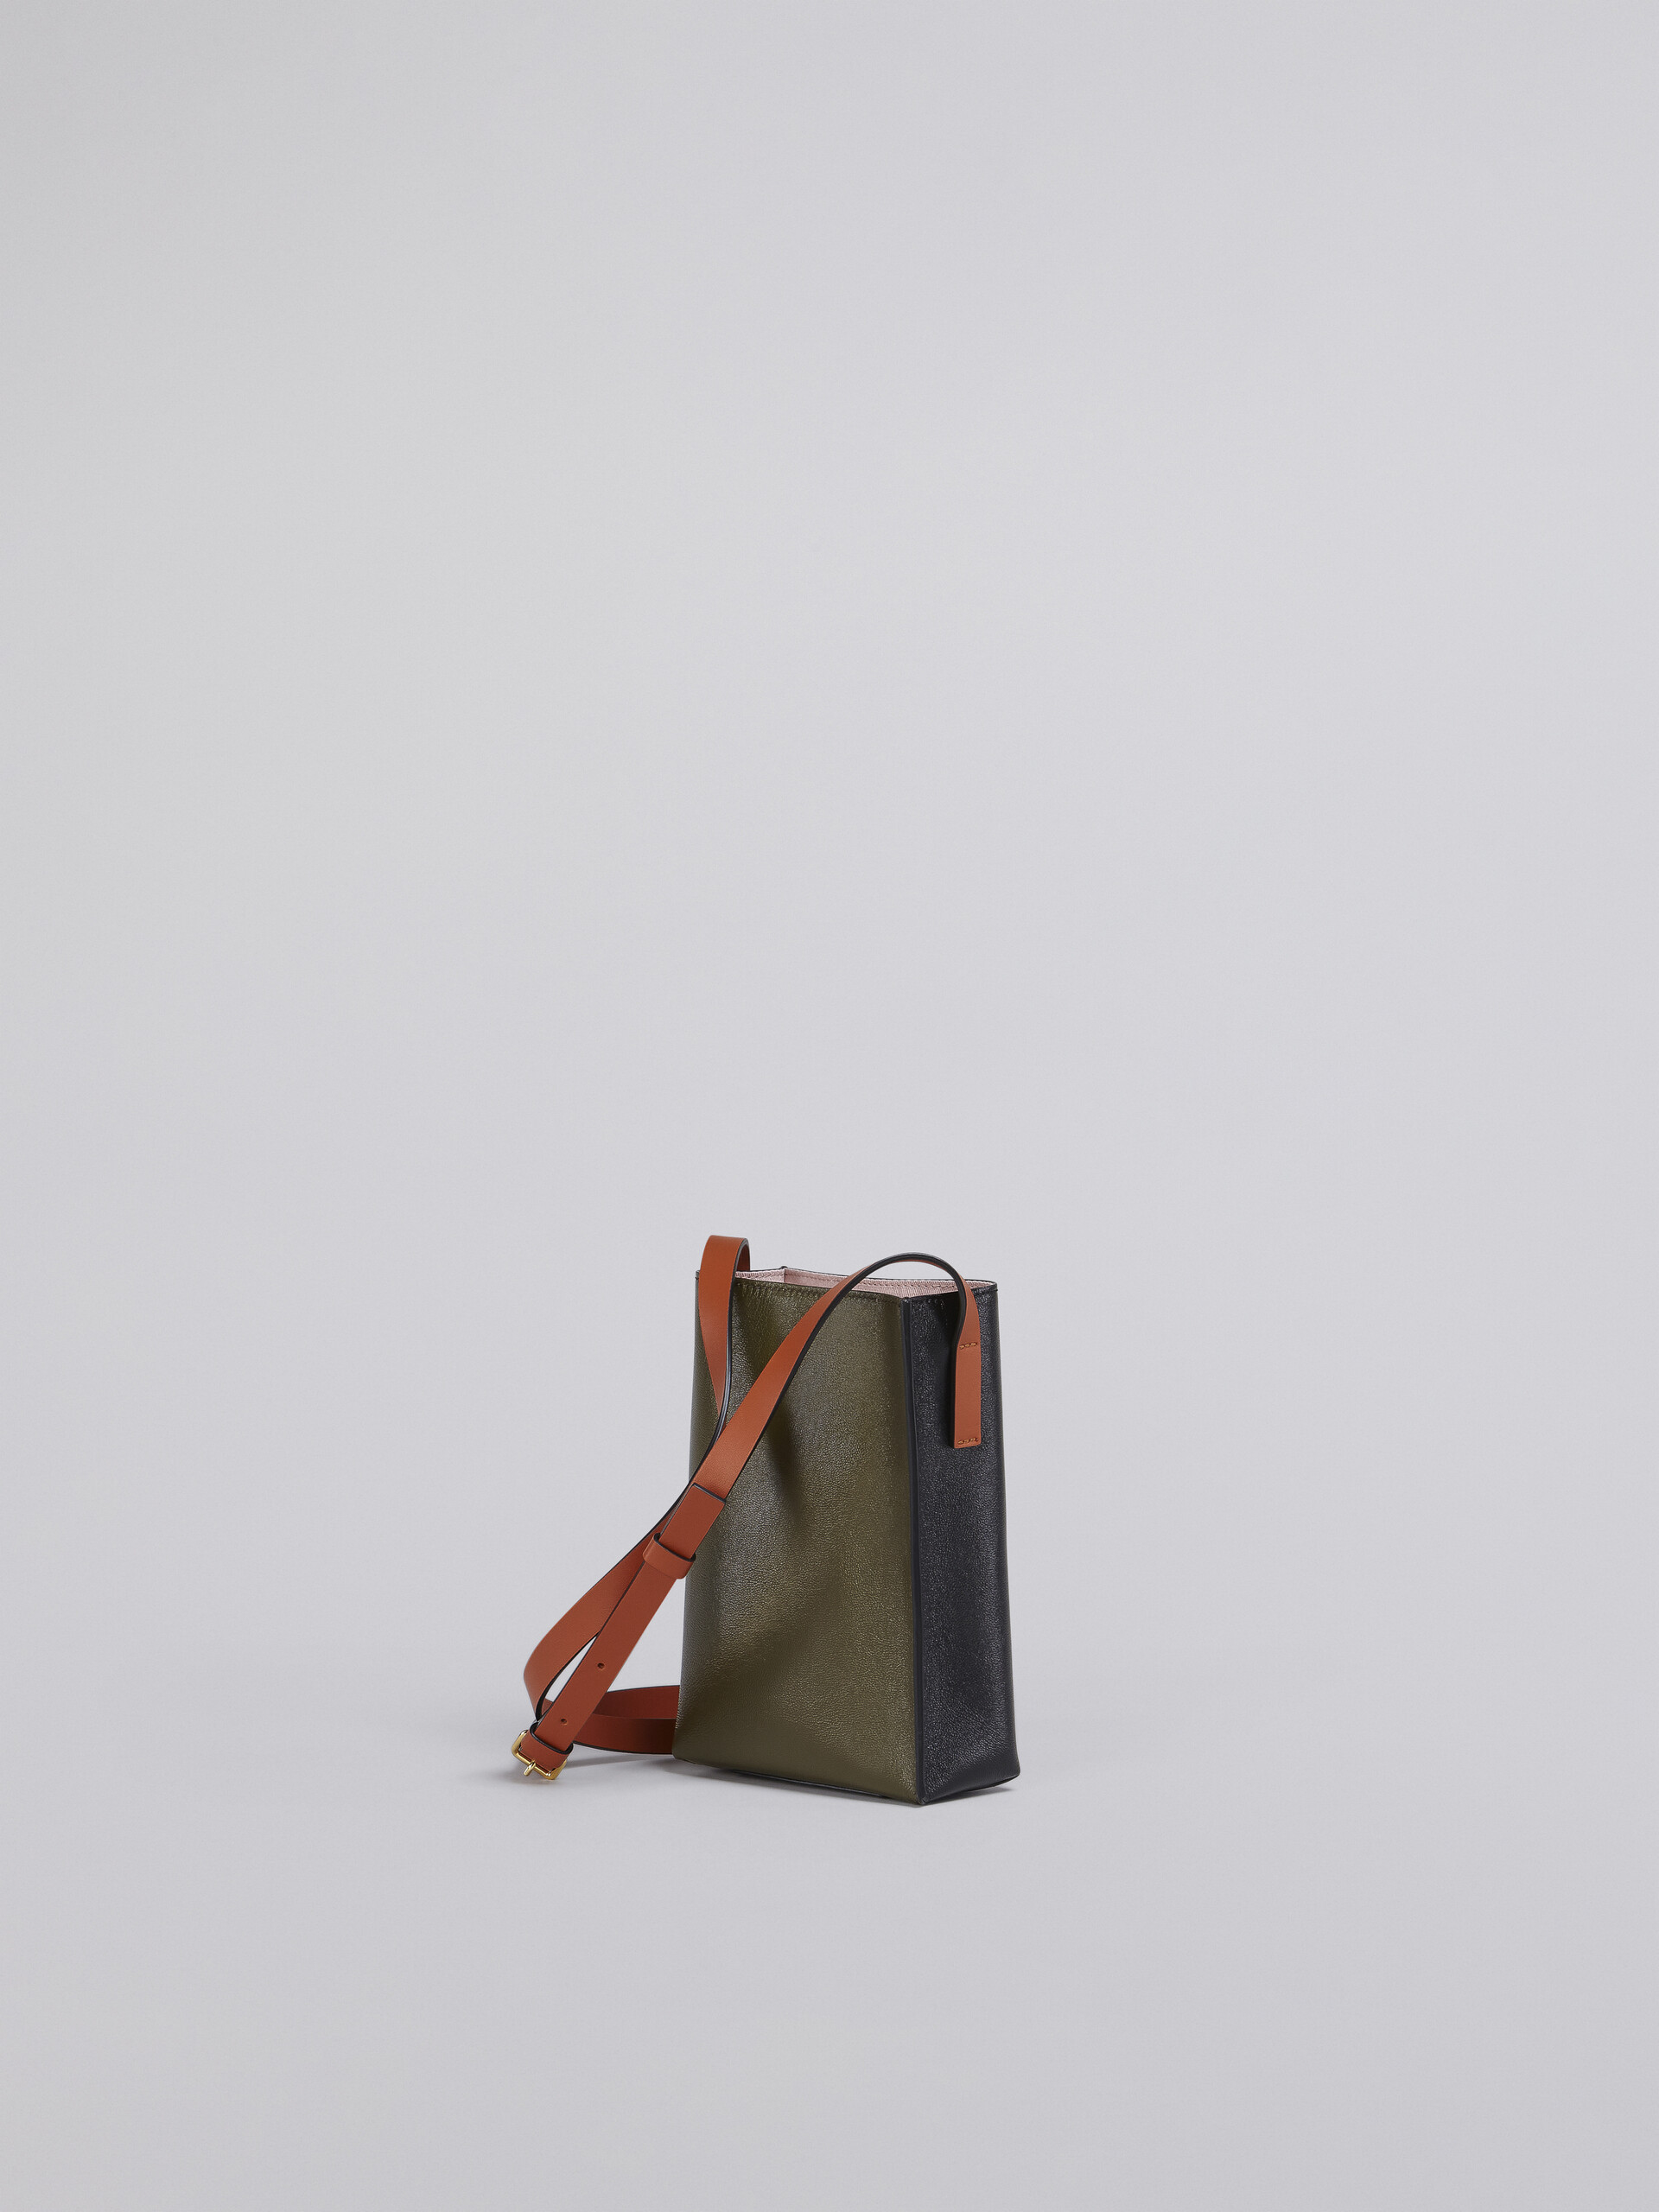 Museo Soft Nano Bag in green and black leather - Shoulder Bags - Image 3